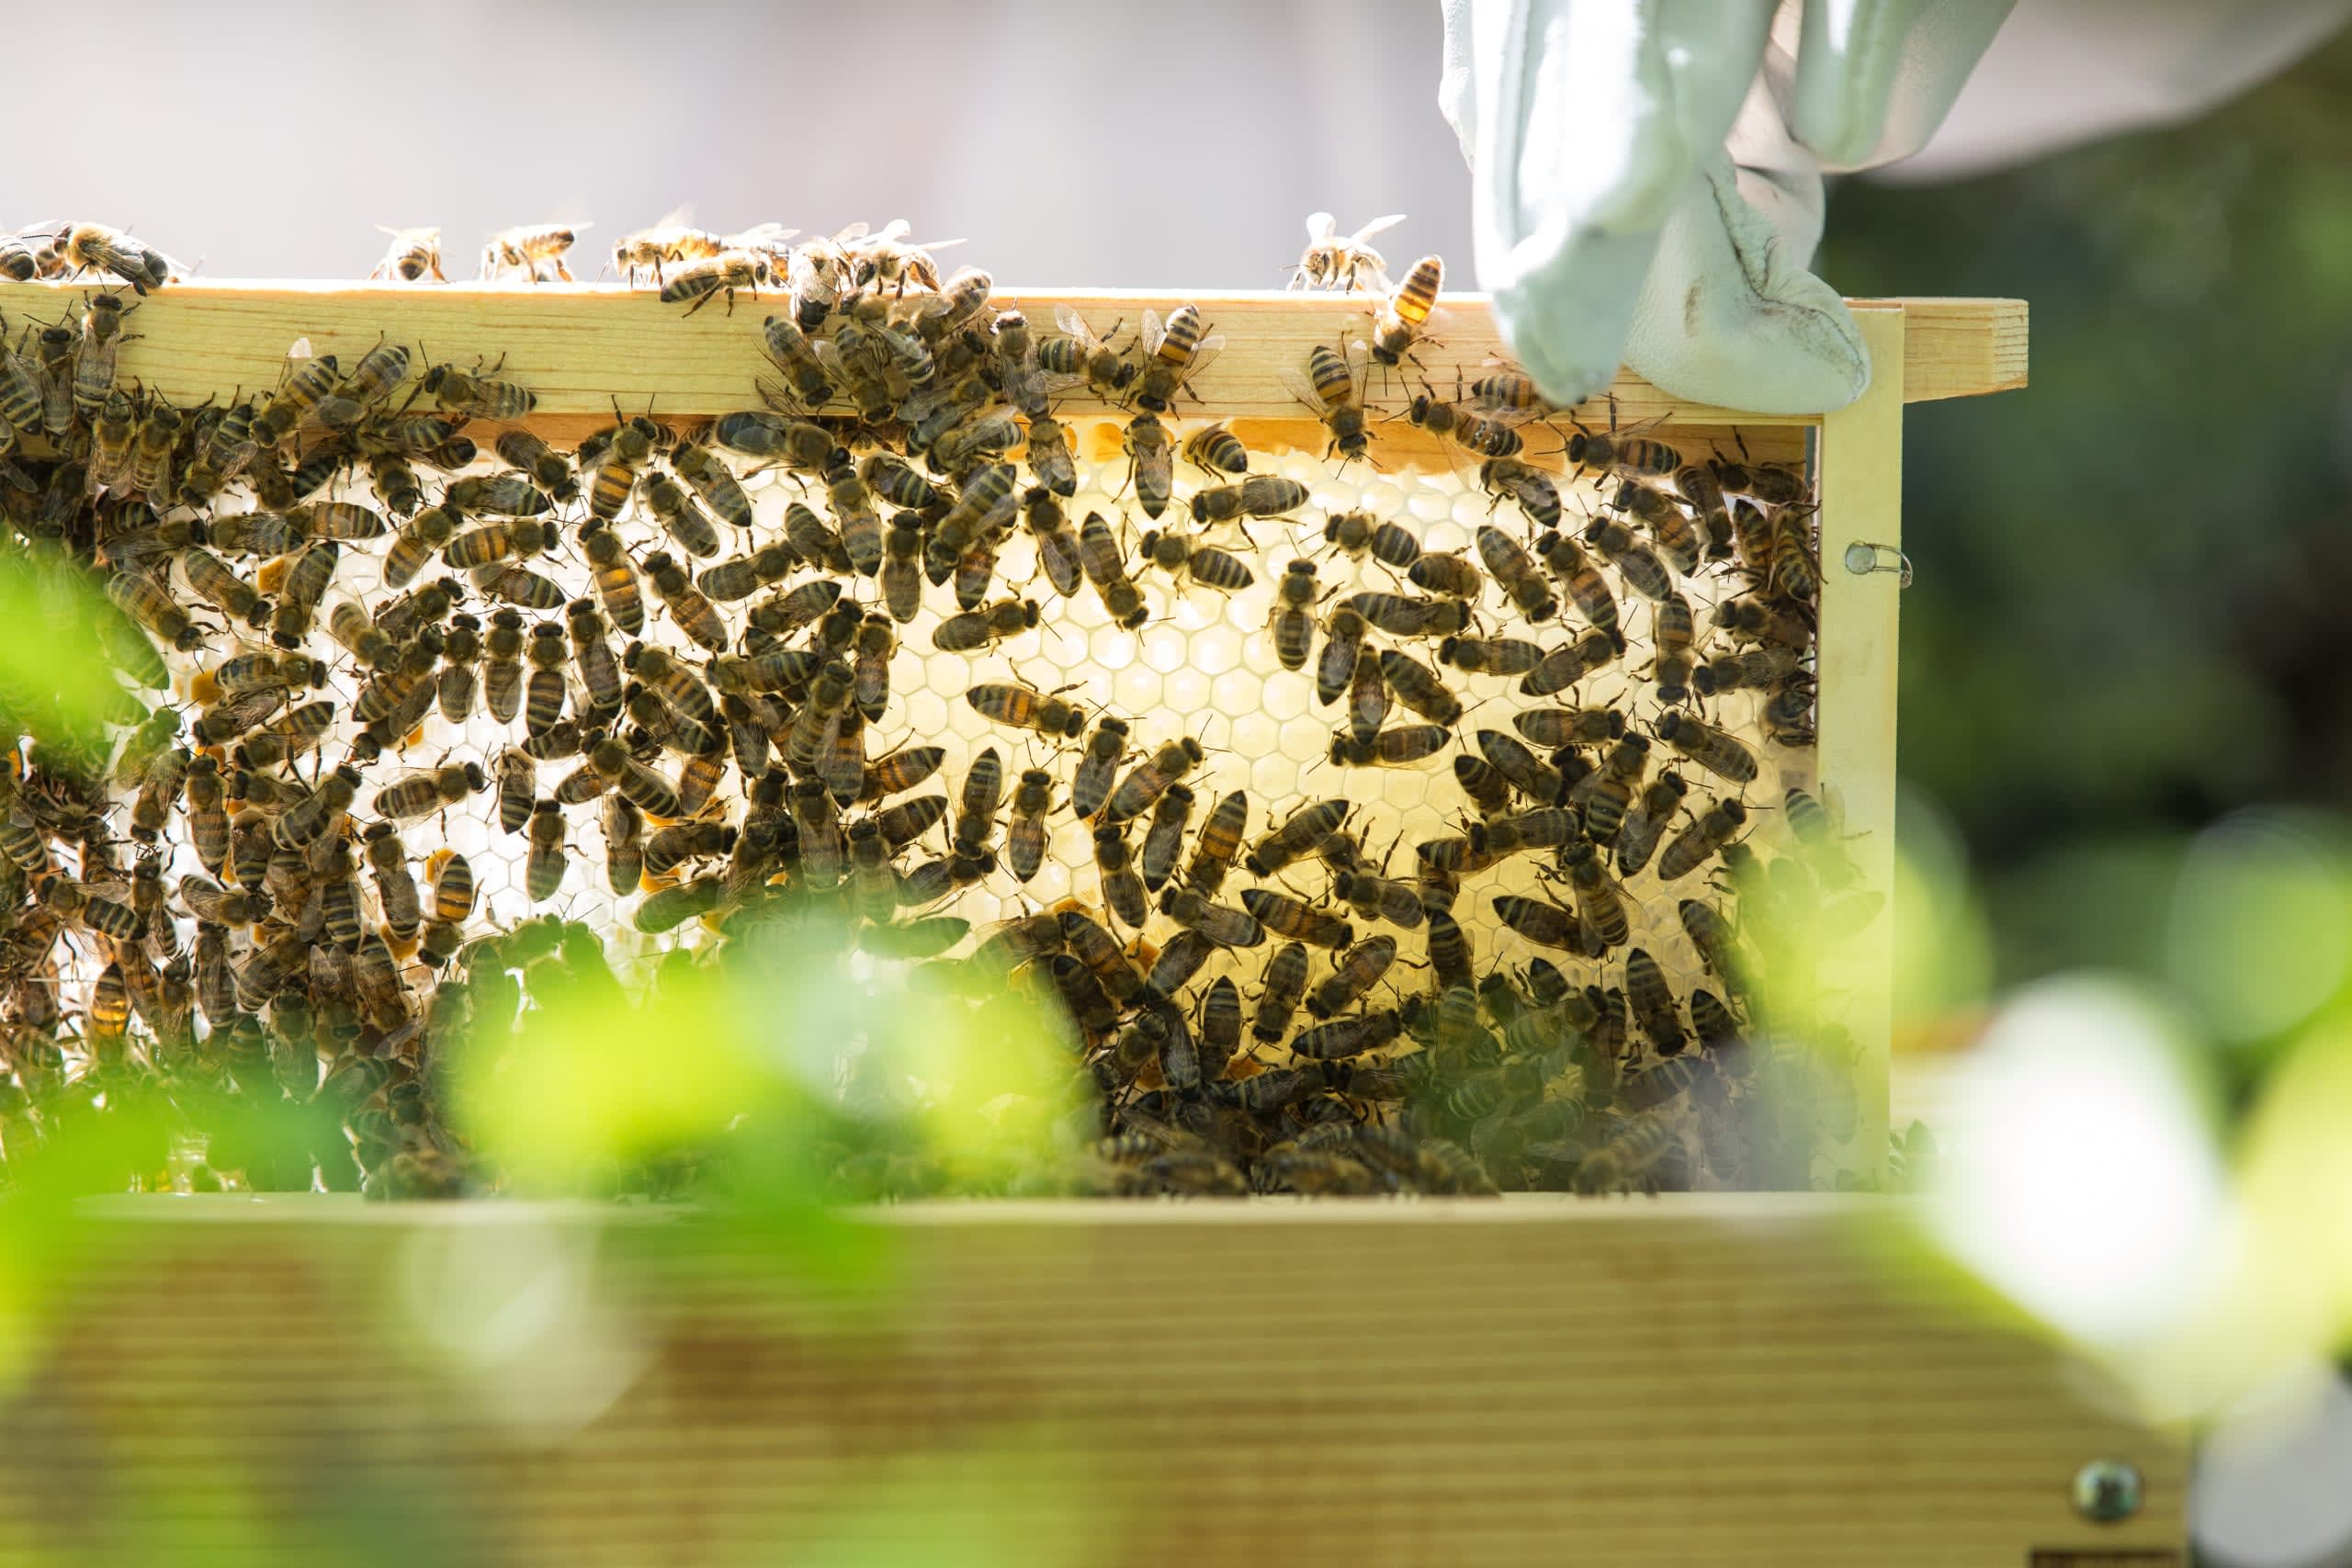 An image shows bees, nature's version of an intelligent swarm.